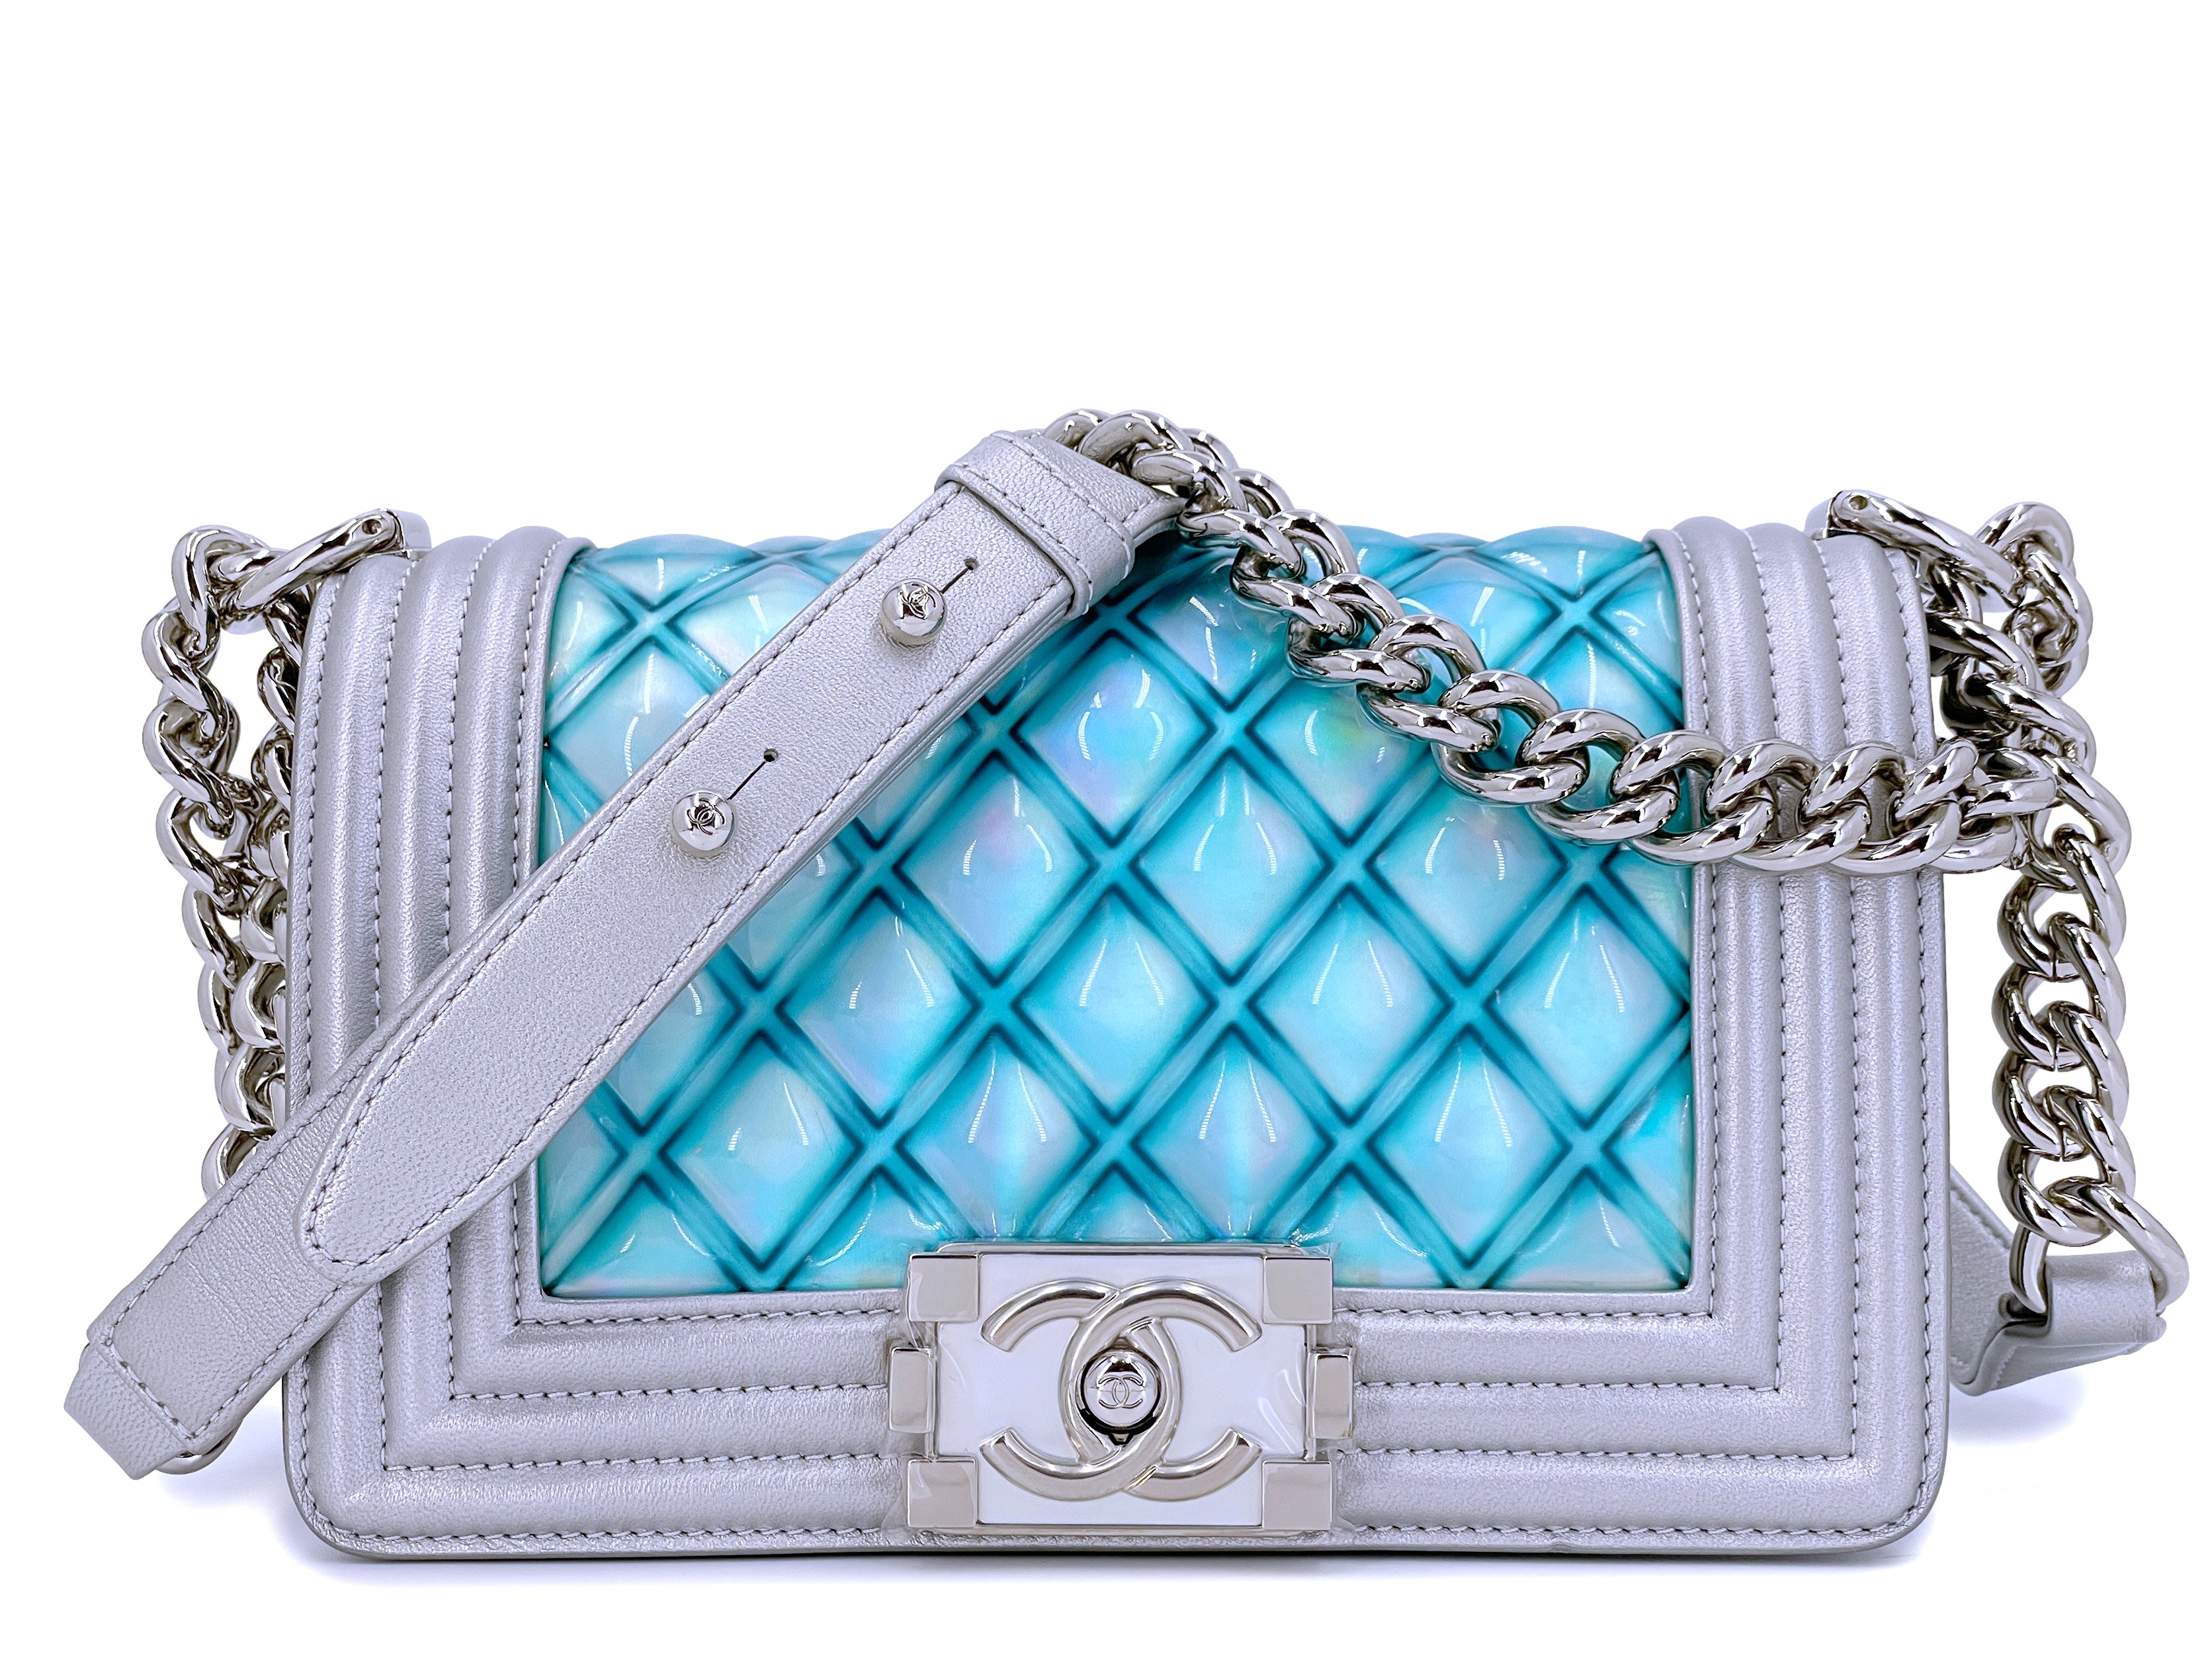 Chanel Camera Shoulder Bag In Light Blue Leather And Pvc Auction